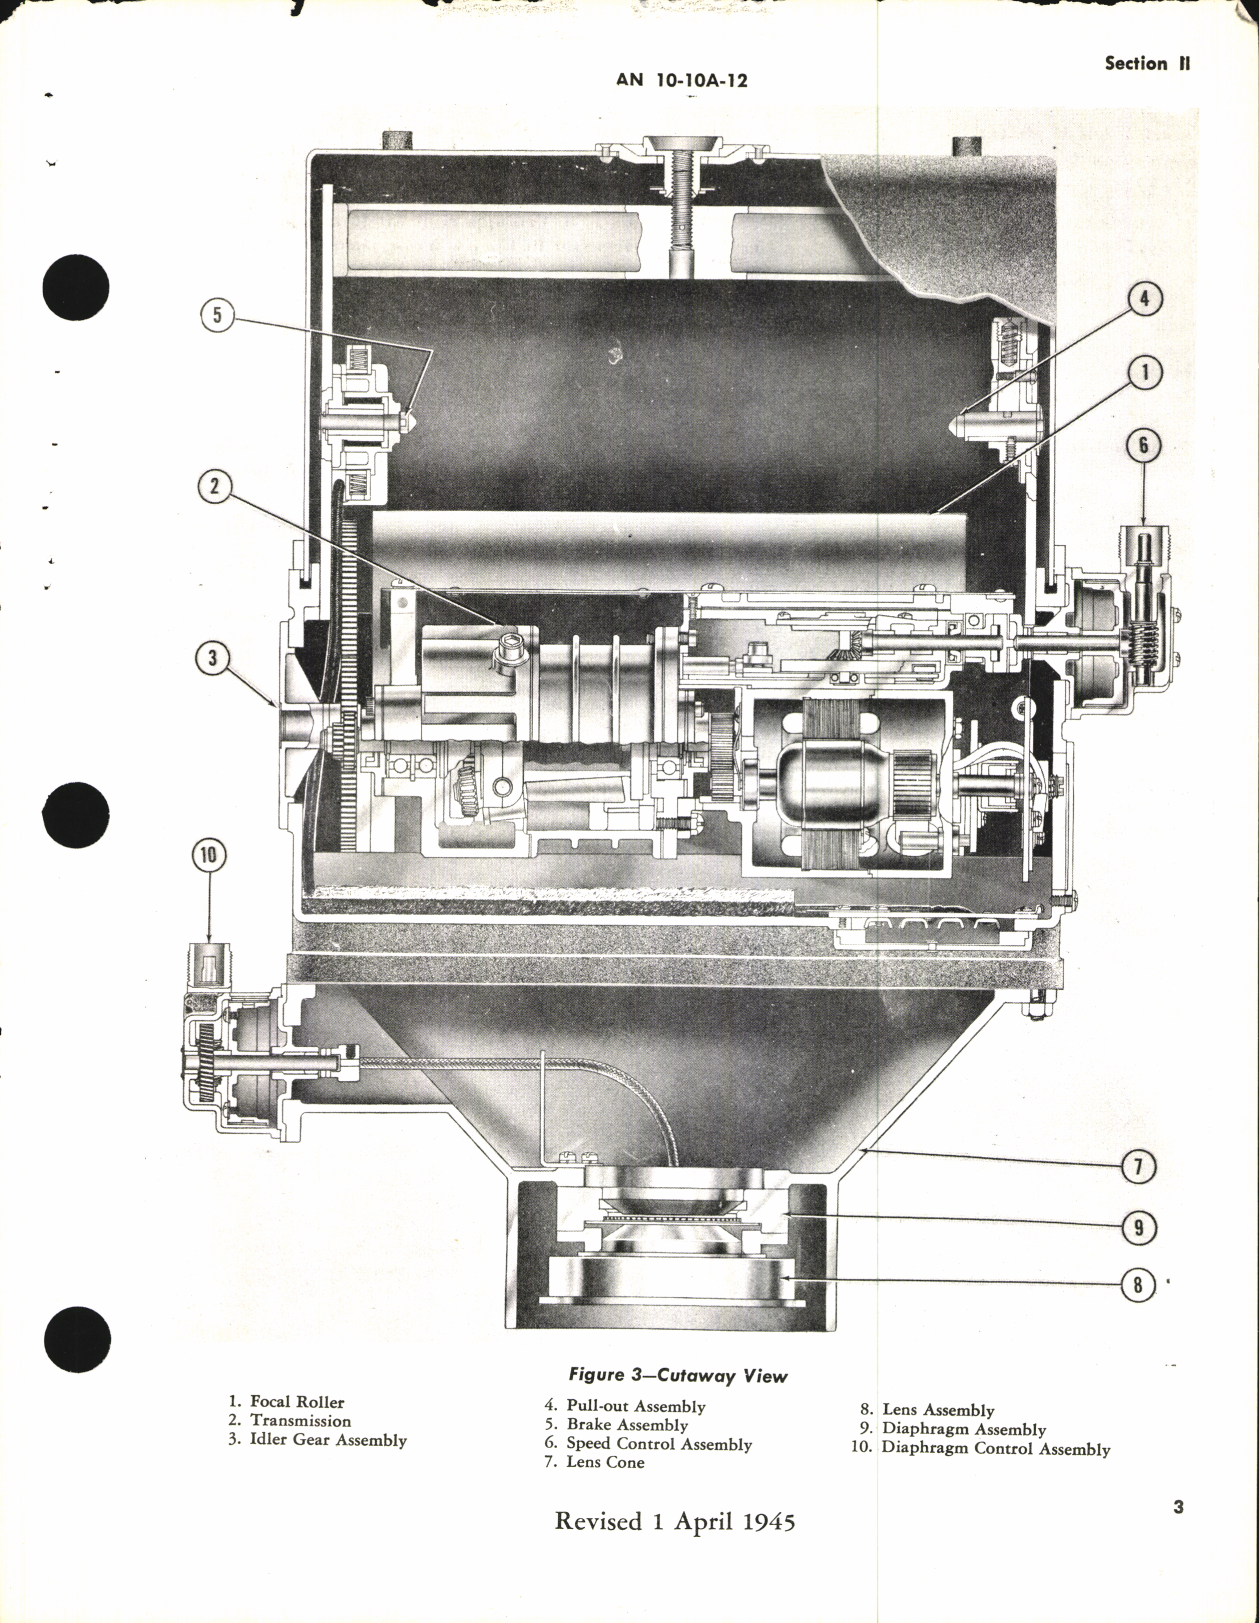 Sample page 7 from AirCorps Library document: Operation, Service, & Overhaul Instructions with Parts Catalog for Type S-7 Aircraft Camera